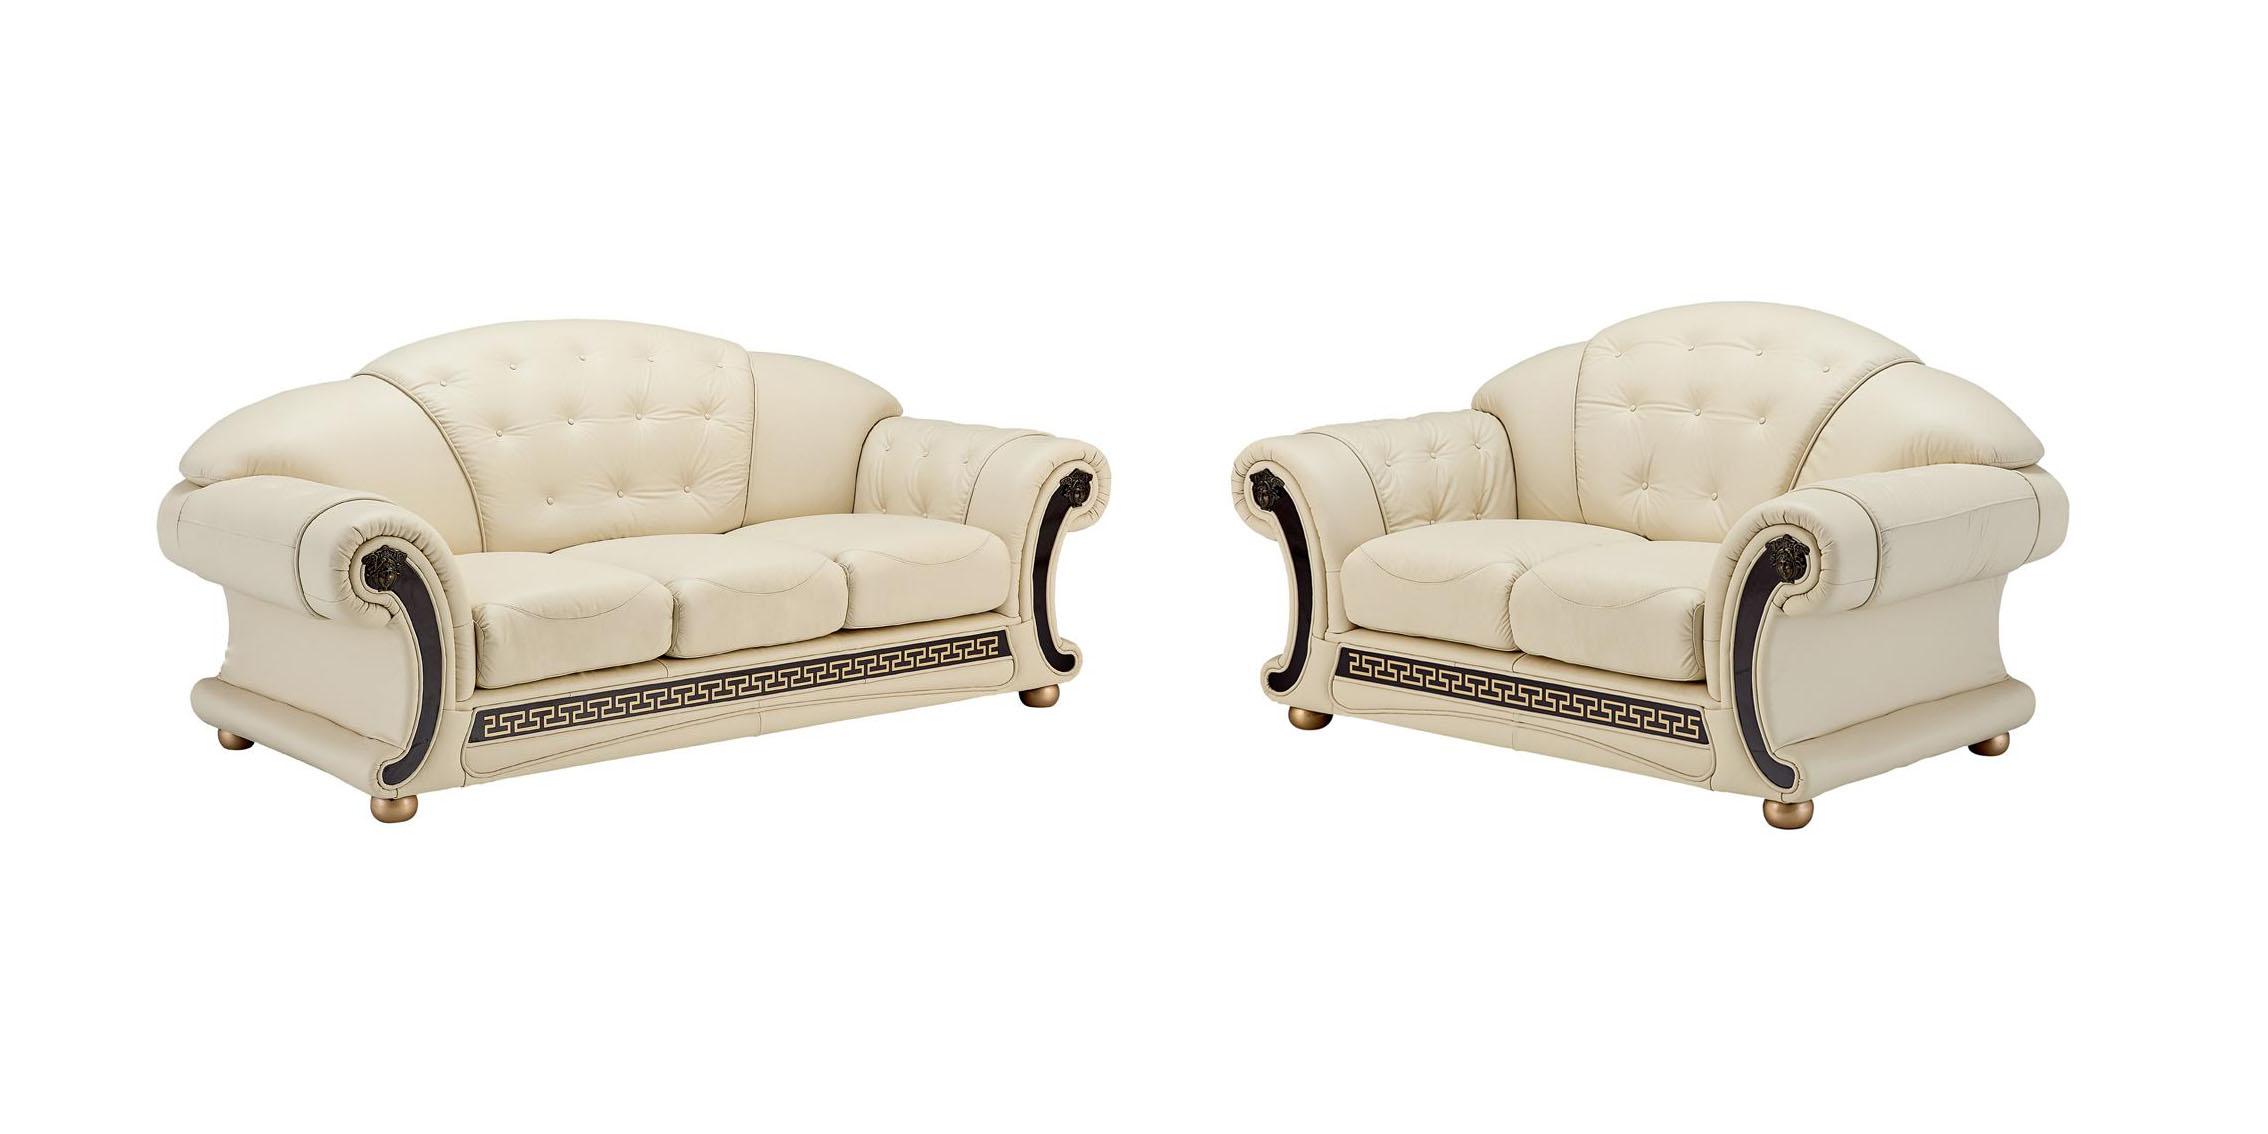 Traditional Sofa and Loveseat Set Apolo ESF Apolo Ivory-2PC in Ivory Top grain leather